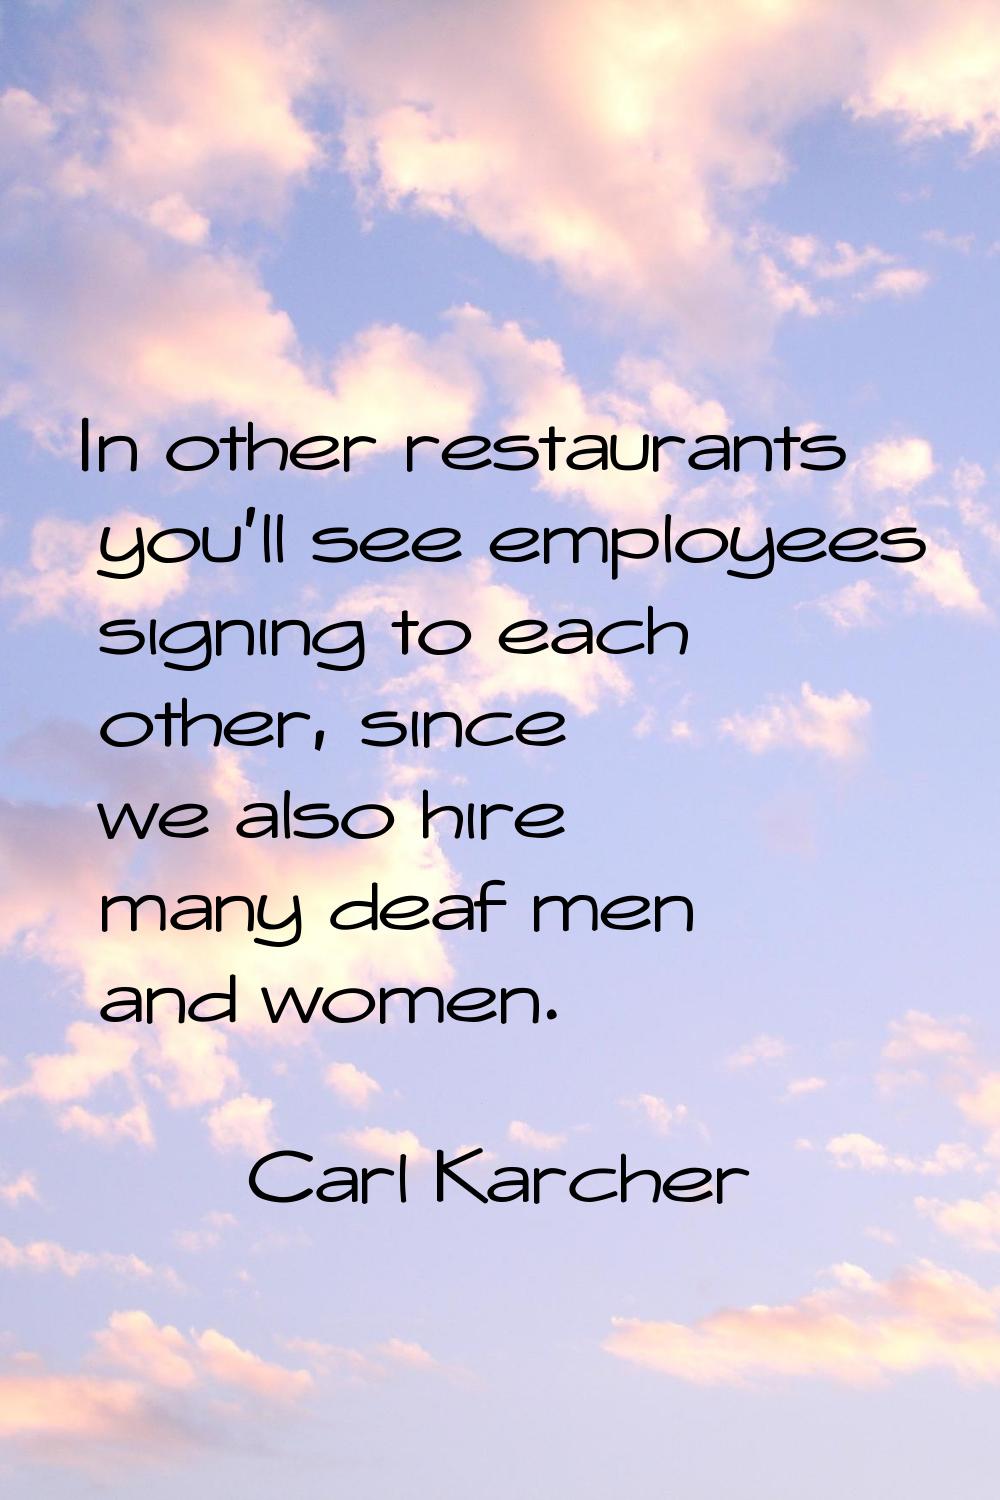 In other restaurants you'll see employees signing to each other, since we also hire many deaf men a